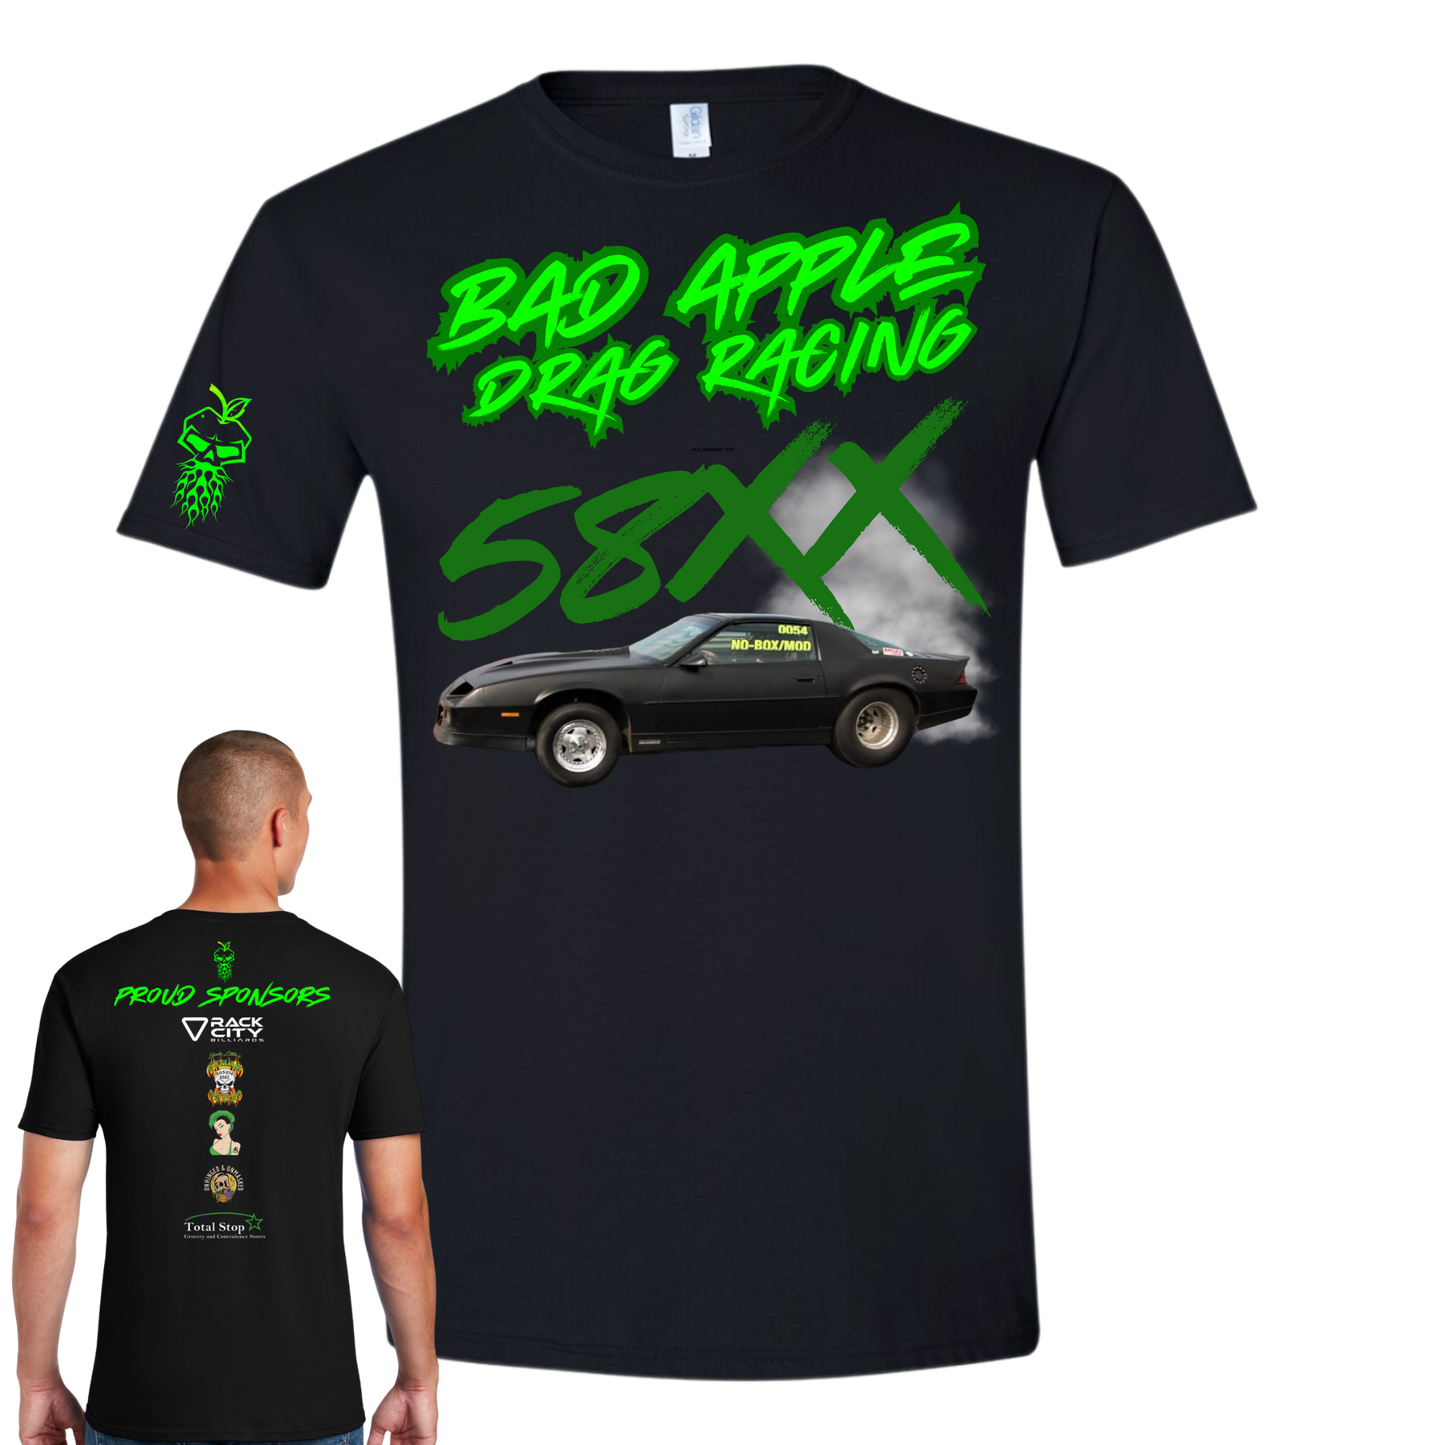 Bad Apple- Specialty Graphic Tee- 58XX profile car- sleeve logo Retail